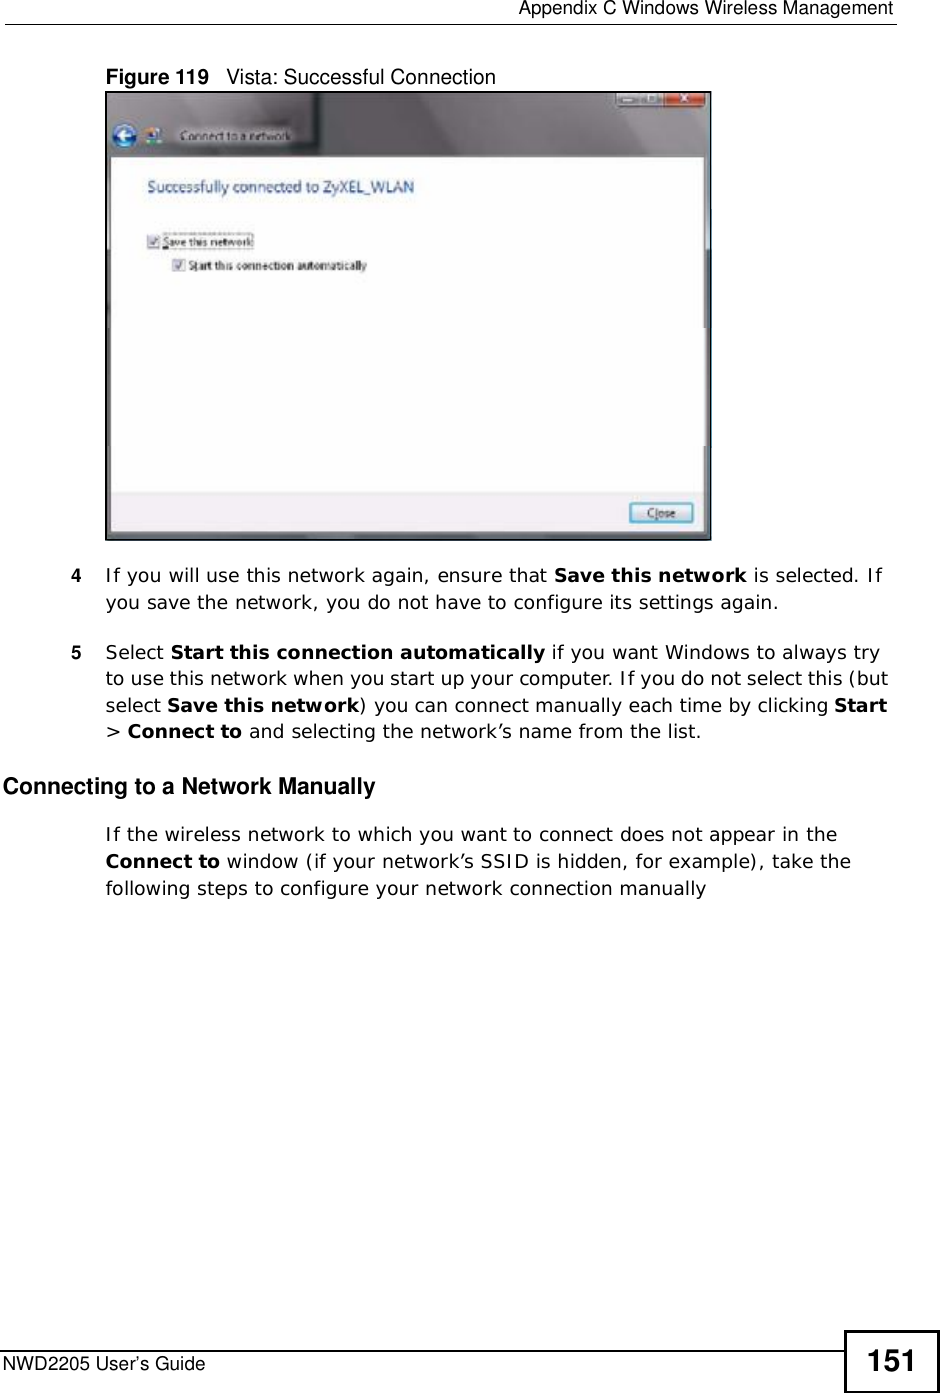  Appendix CWindows Wireless ManagementNWD2205 User’s Guide 151Figure 119   Vista: Successful Connection4If you will use this network again, ensure that Save this network is selected. If you save the network, you do not have to configure its settings again.5Select Start this connection automatically if you want Windows to always try to use this network when you start up your computer. If you do not select this (but select Save this network) you can connect manually each time by clicking Start&gt;Connect to and selecting the network’s name from the list.Connecting to a Network ManuallyIf the wireless network to which you want to connect does not appear in the Connect to window (if your network’s SSID is hidden, for example), take the following steps to configure your network connection manually